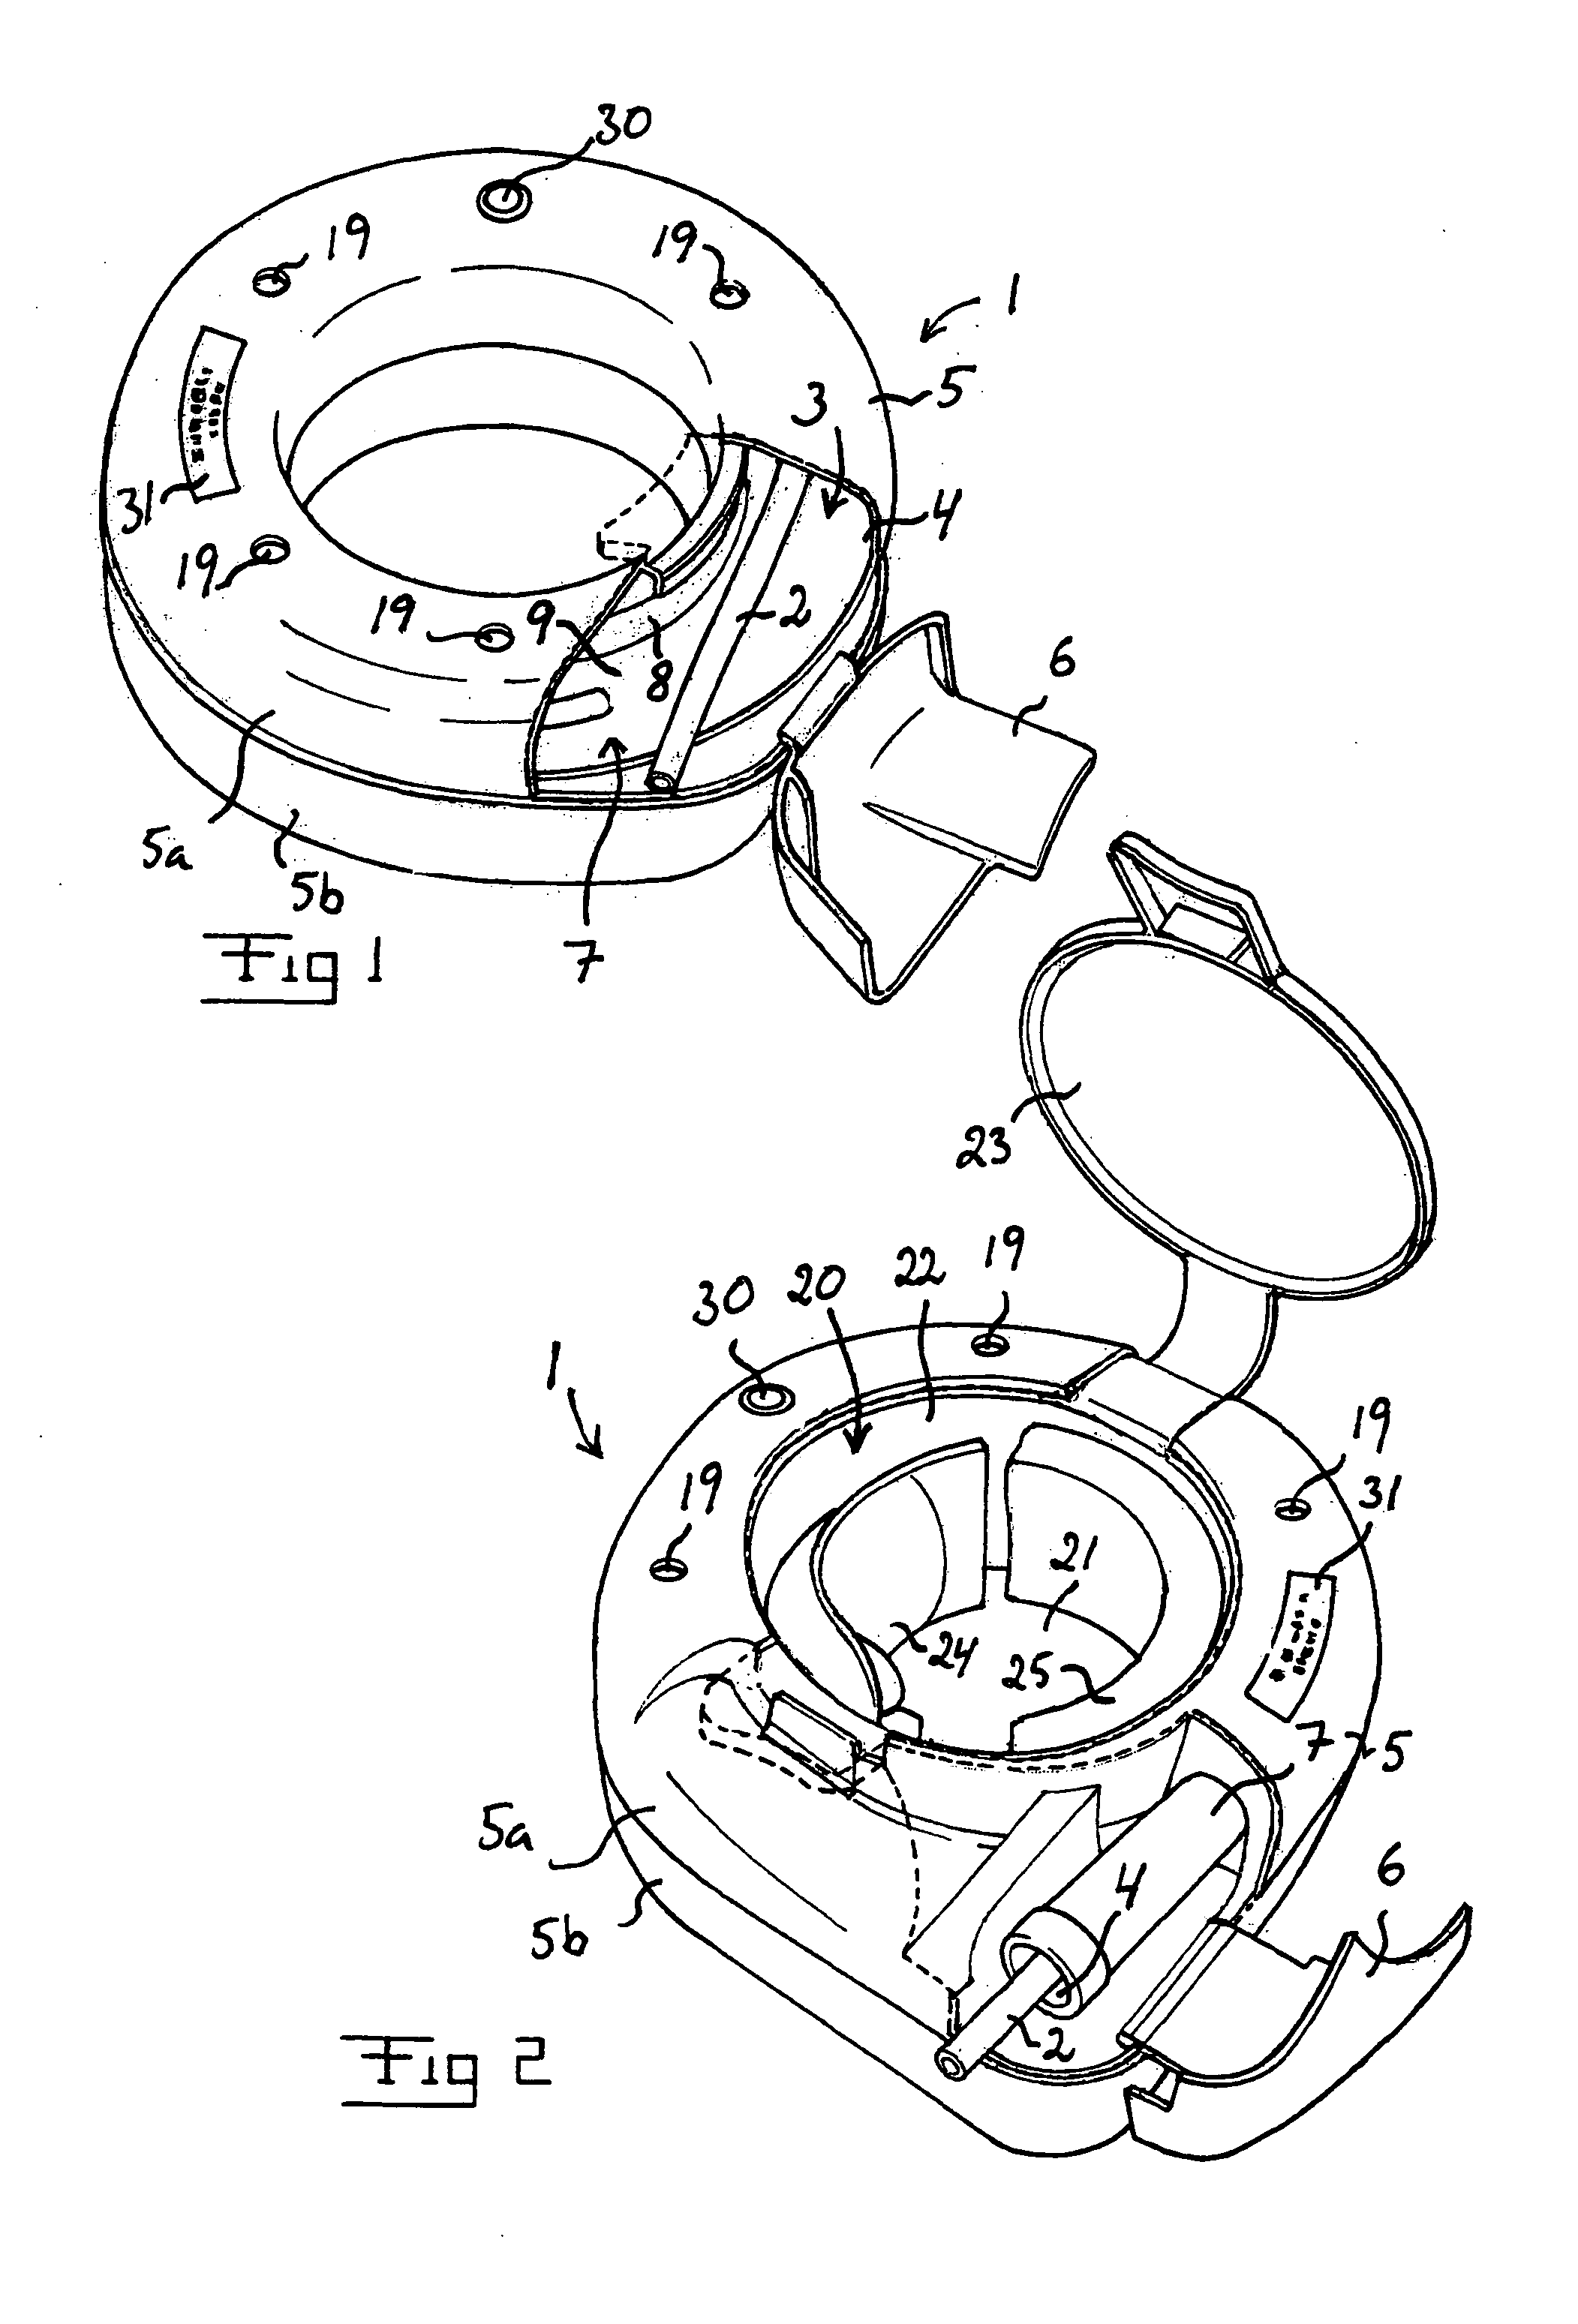 Receptacle for a Catheter